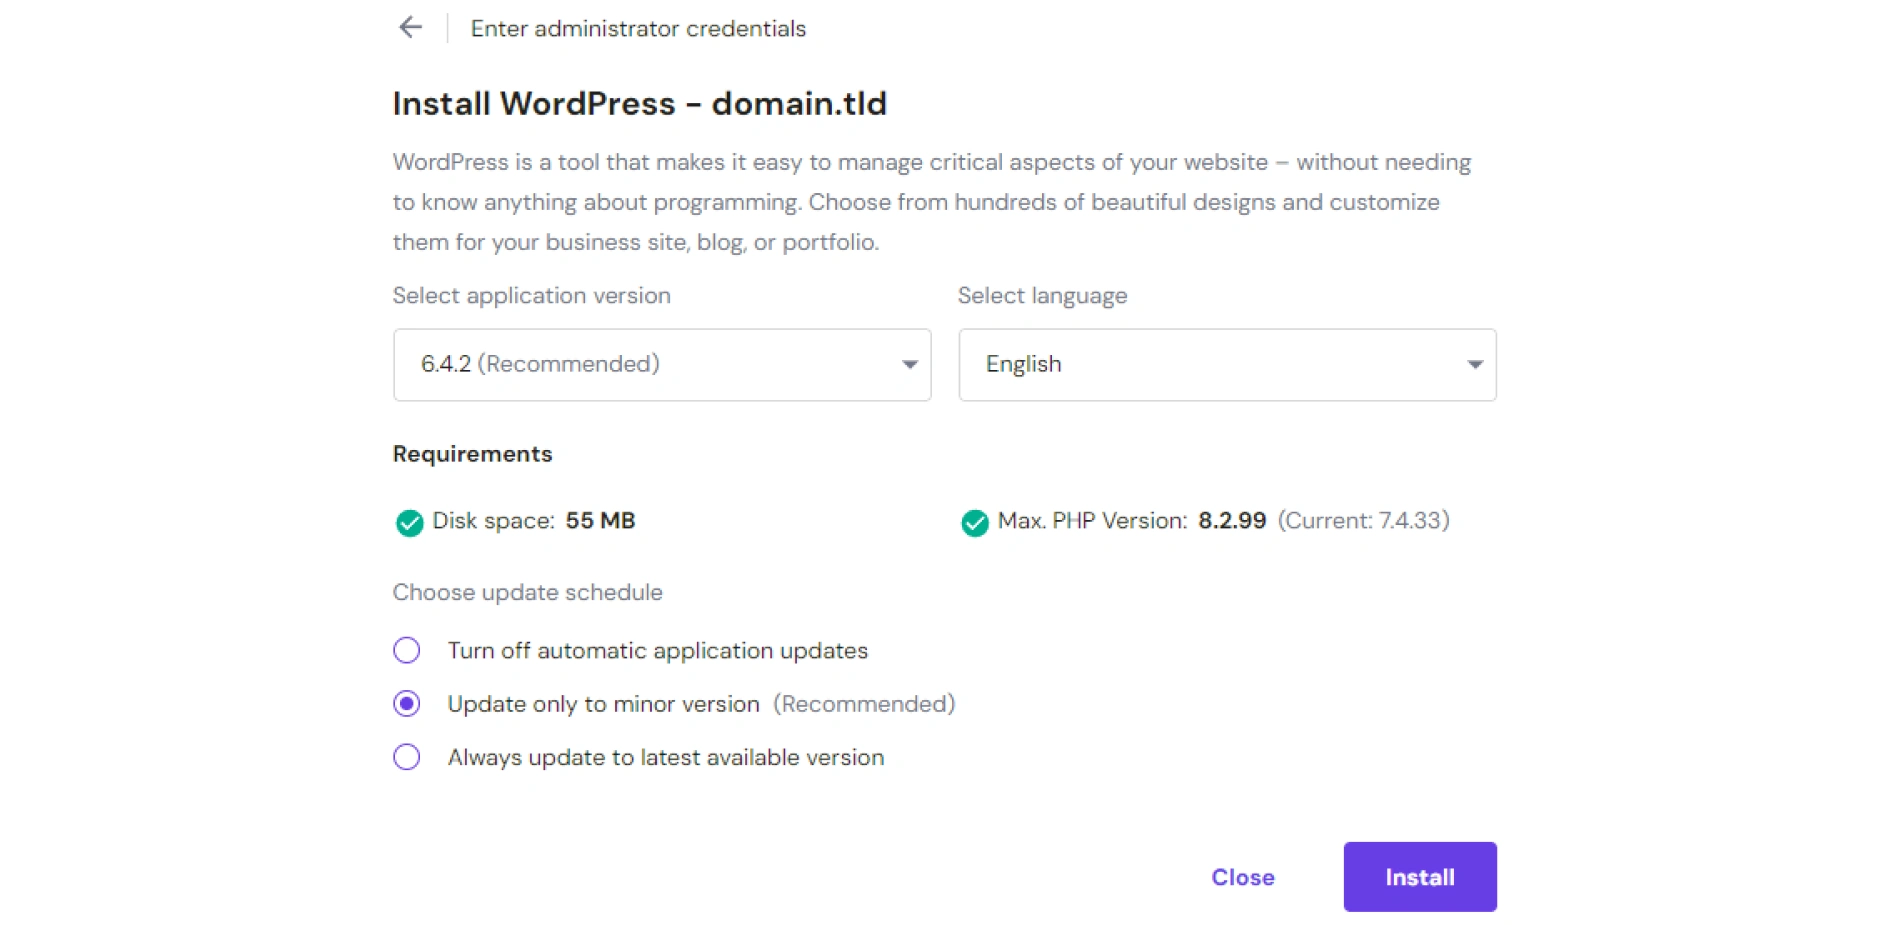 Settings page for WordPress: Customize your website's appearance, plugins, and user preferences.